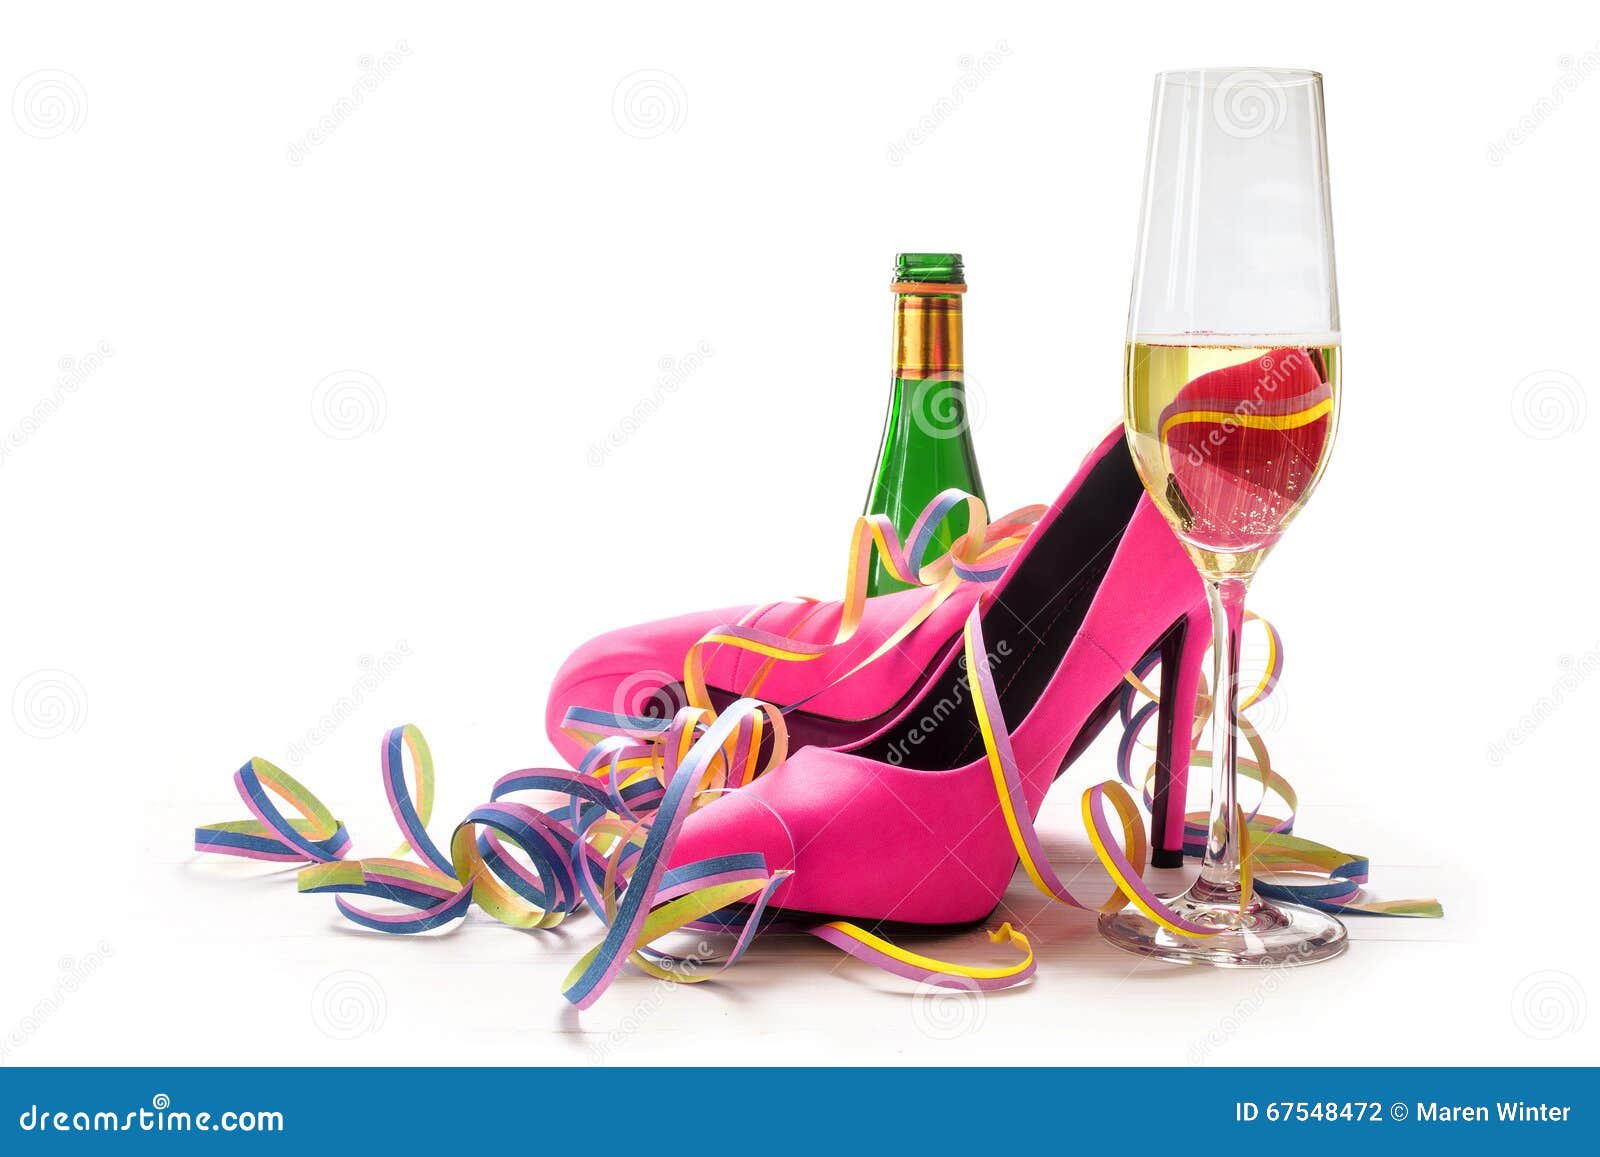 I love heels 3  time to drink champagne and dance on the table   Pink  shoes Heels Fabulous shoes